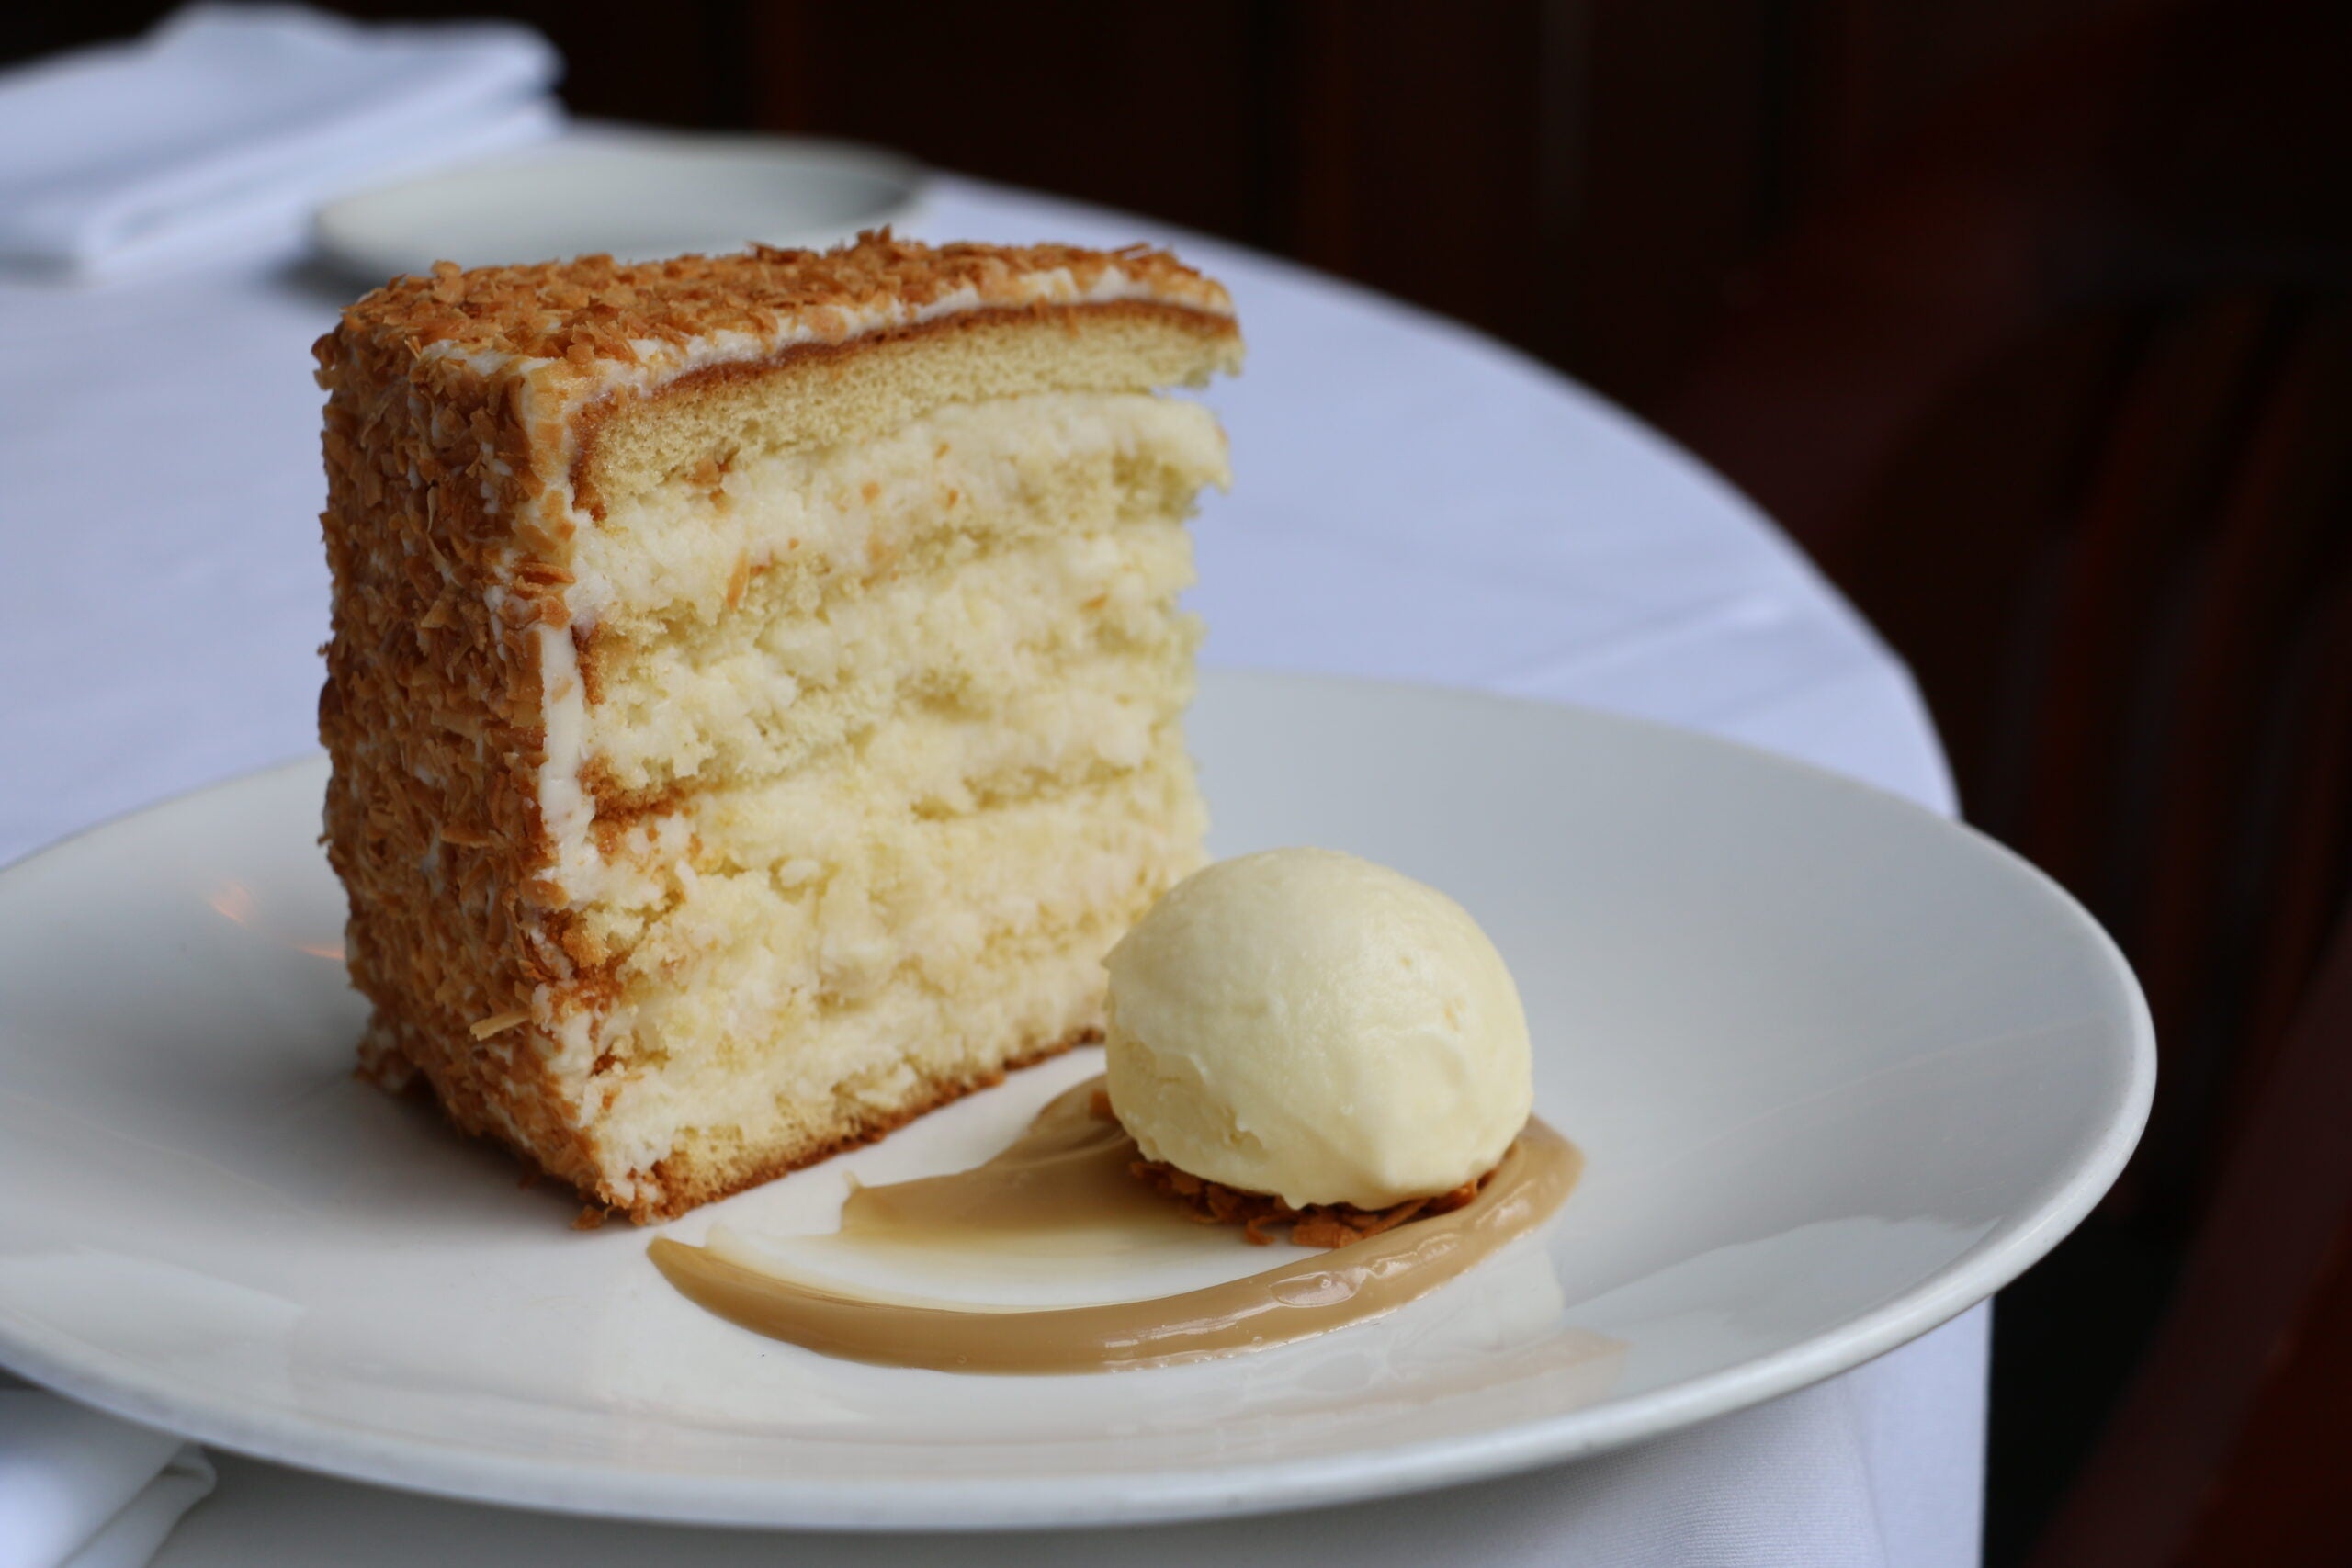 The coconut layer cake at Grill 23.